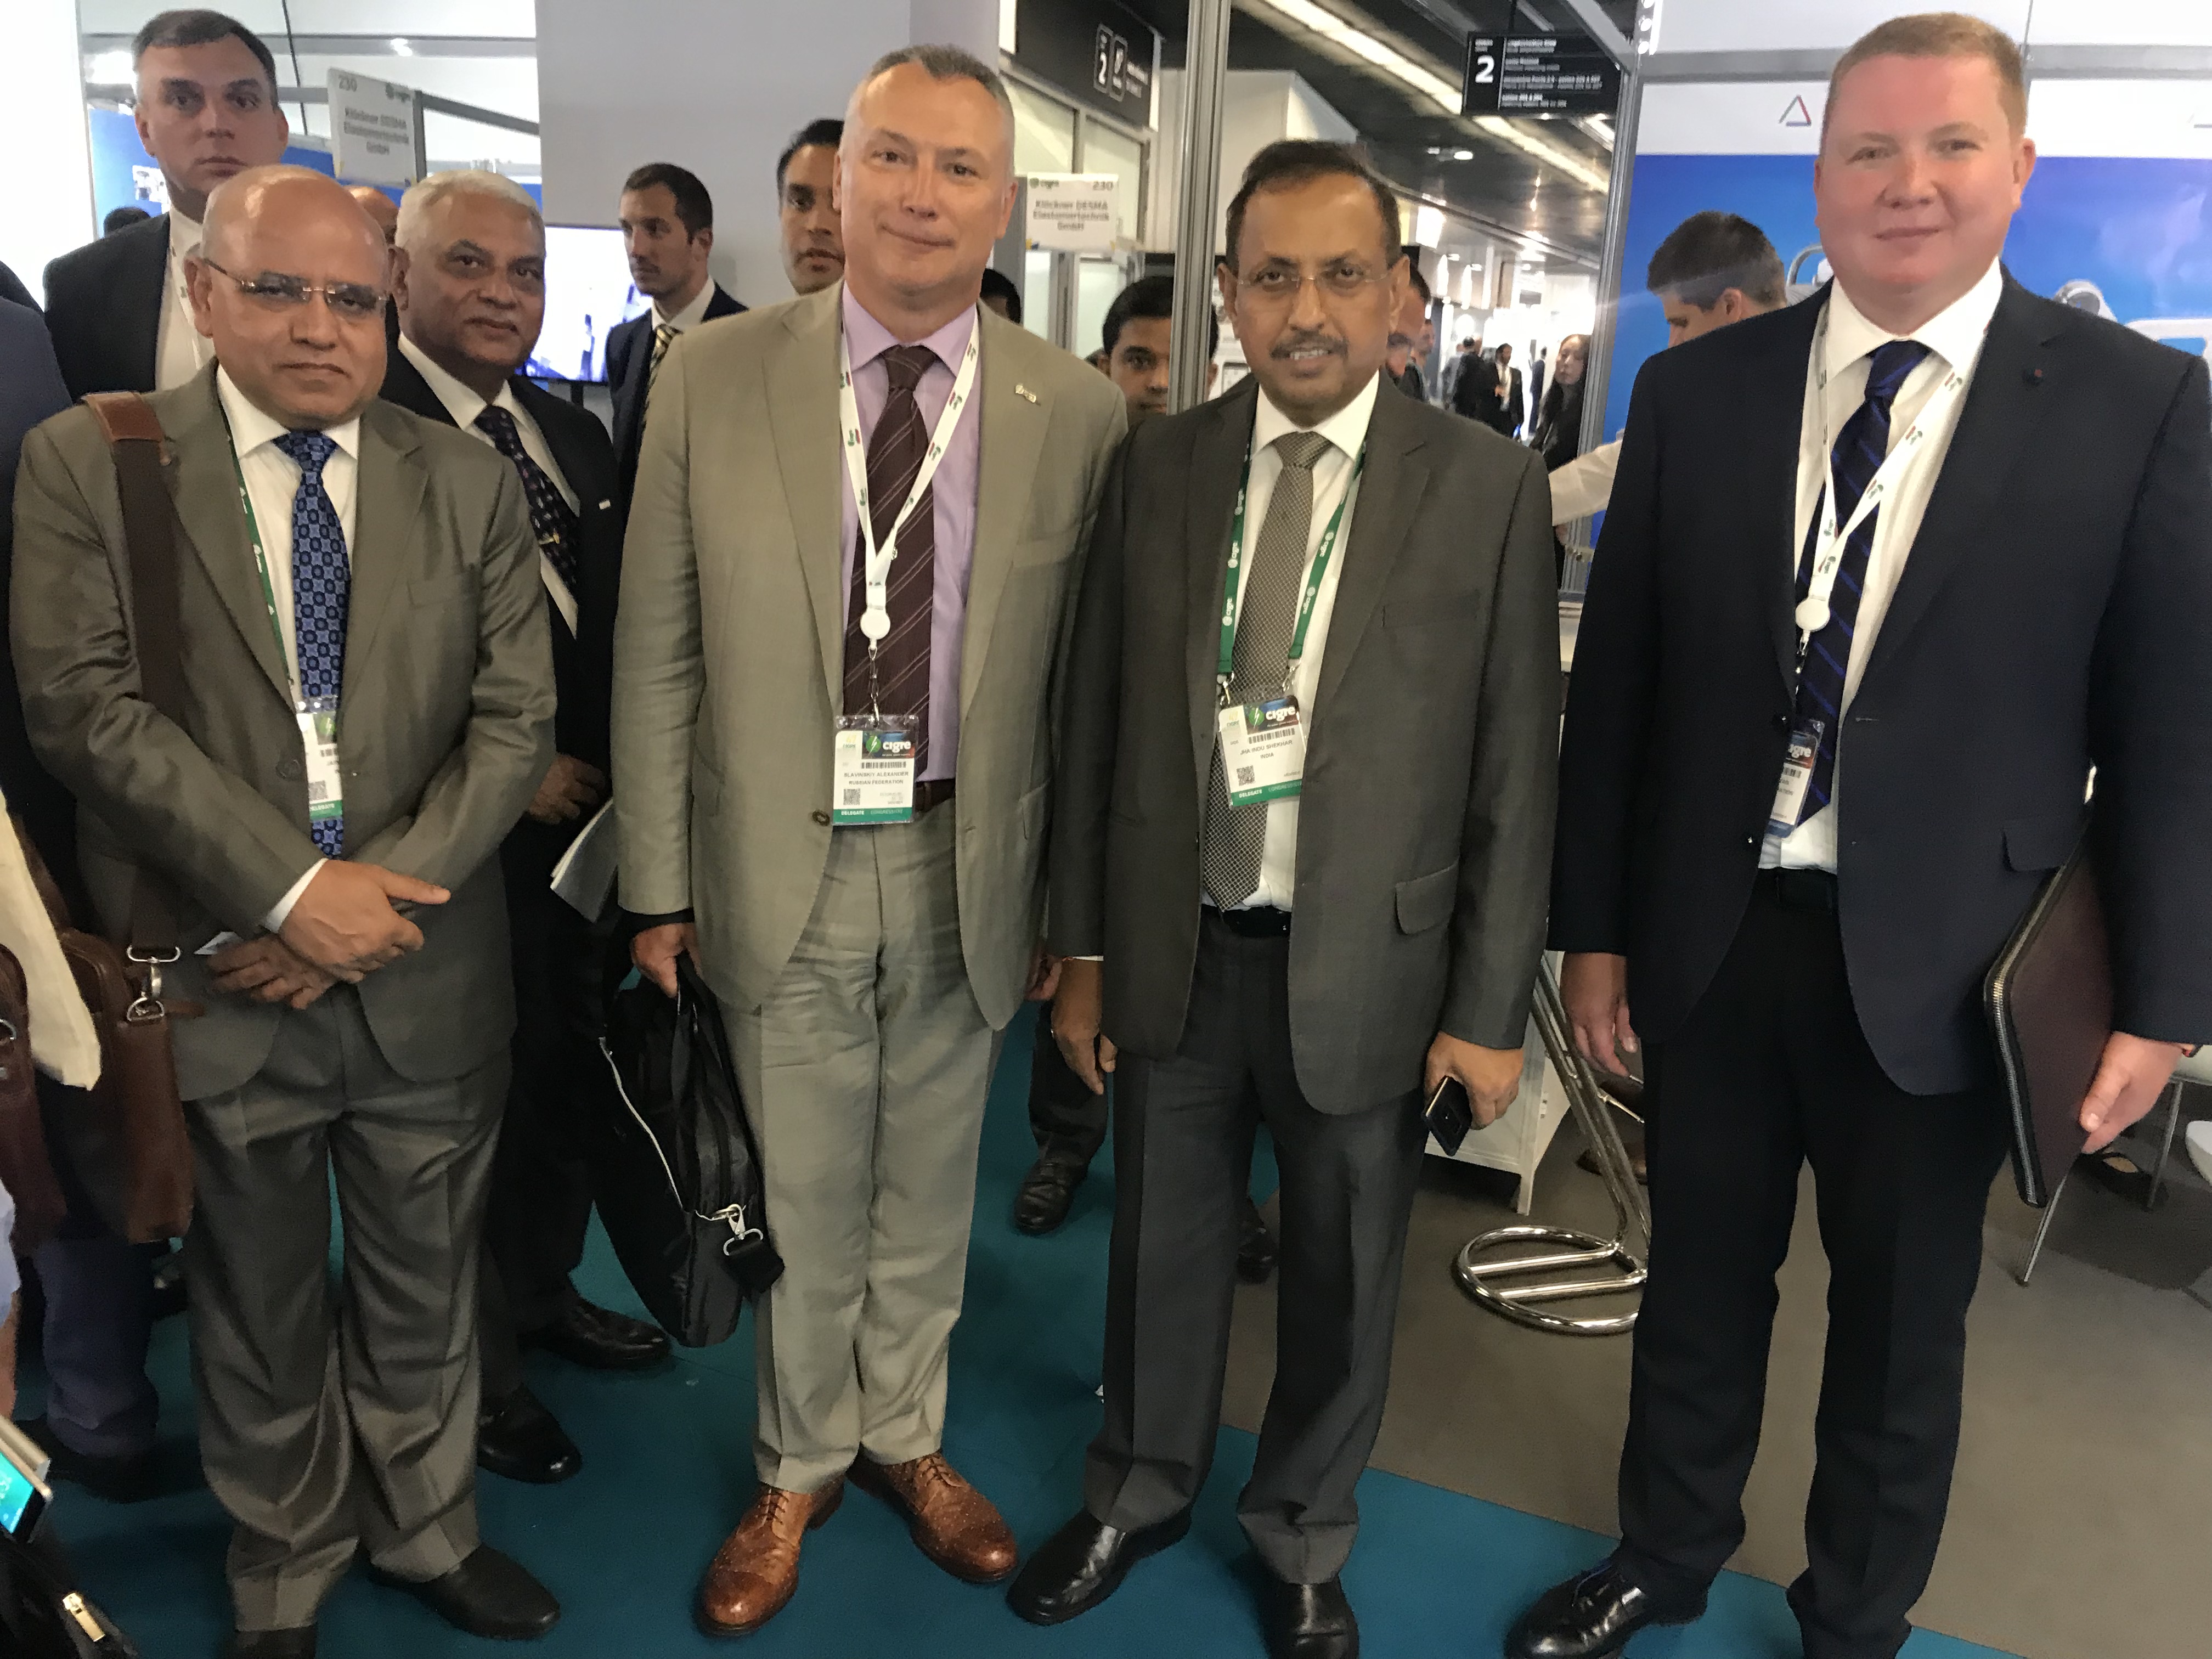 Participants of the meeting between he management of PowerGrid and Izolyator, in the foreground, L-R: Executive Director at PowerGrid Anil Jain, Alexander Slavinsky, Chairman and General Manager of PowerGrid I. S. Jha and Ivan Panfilov